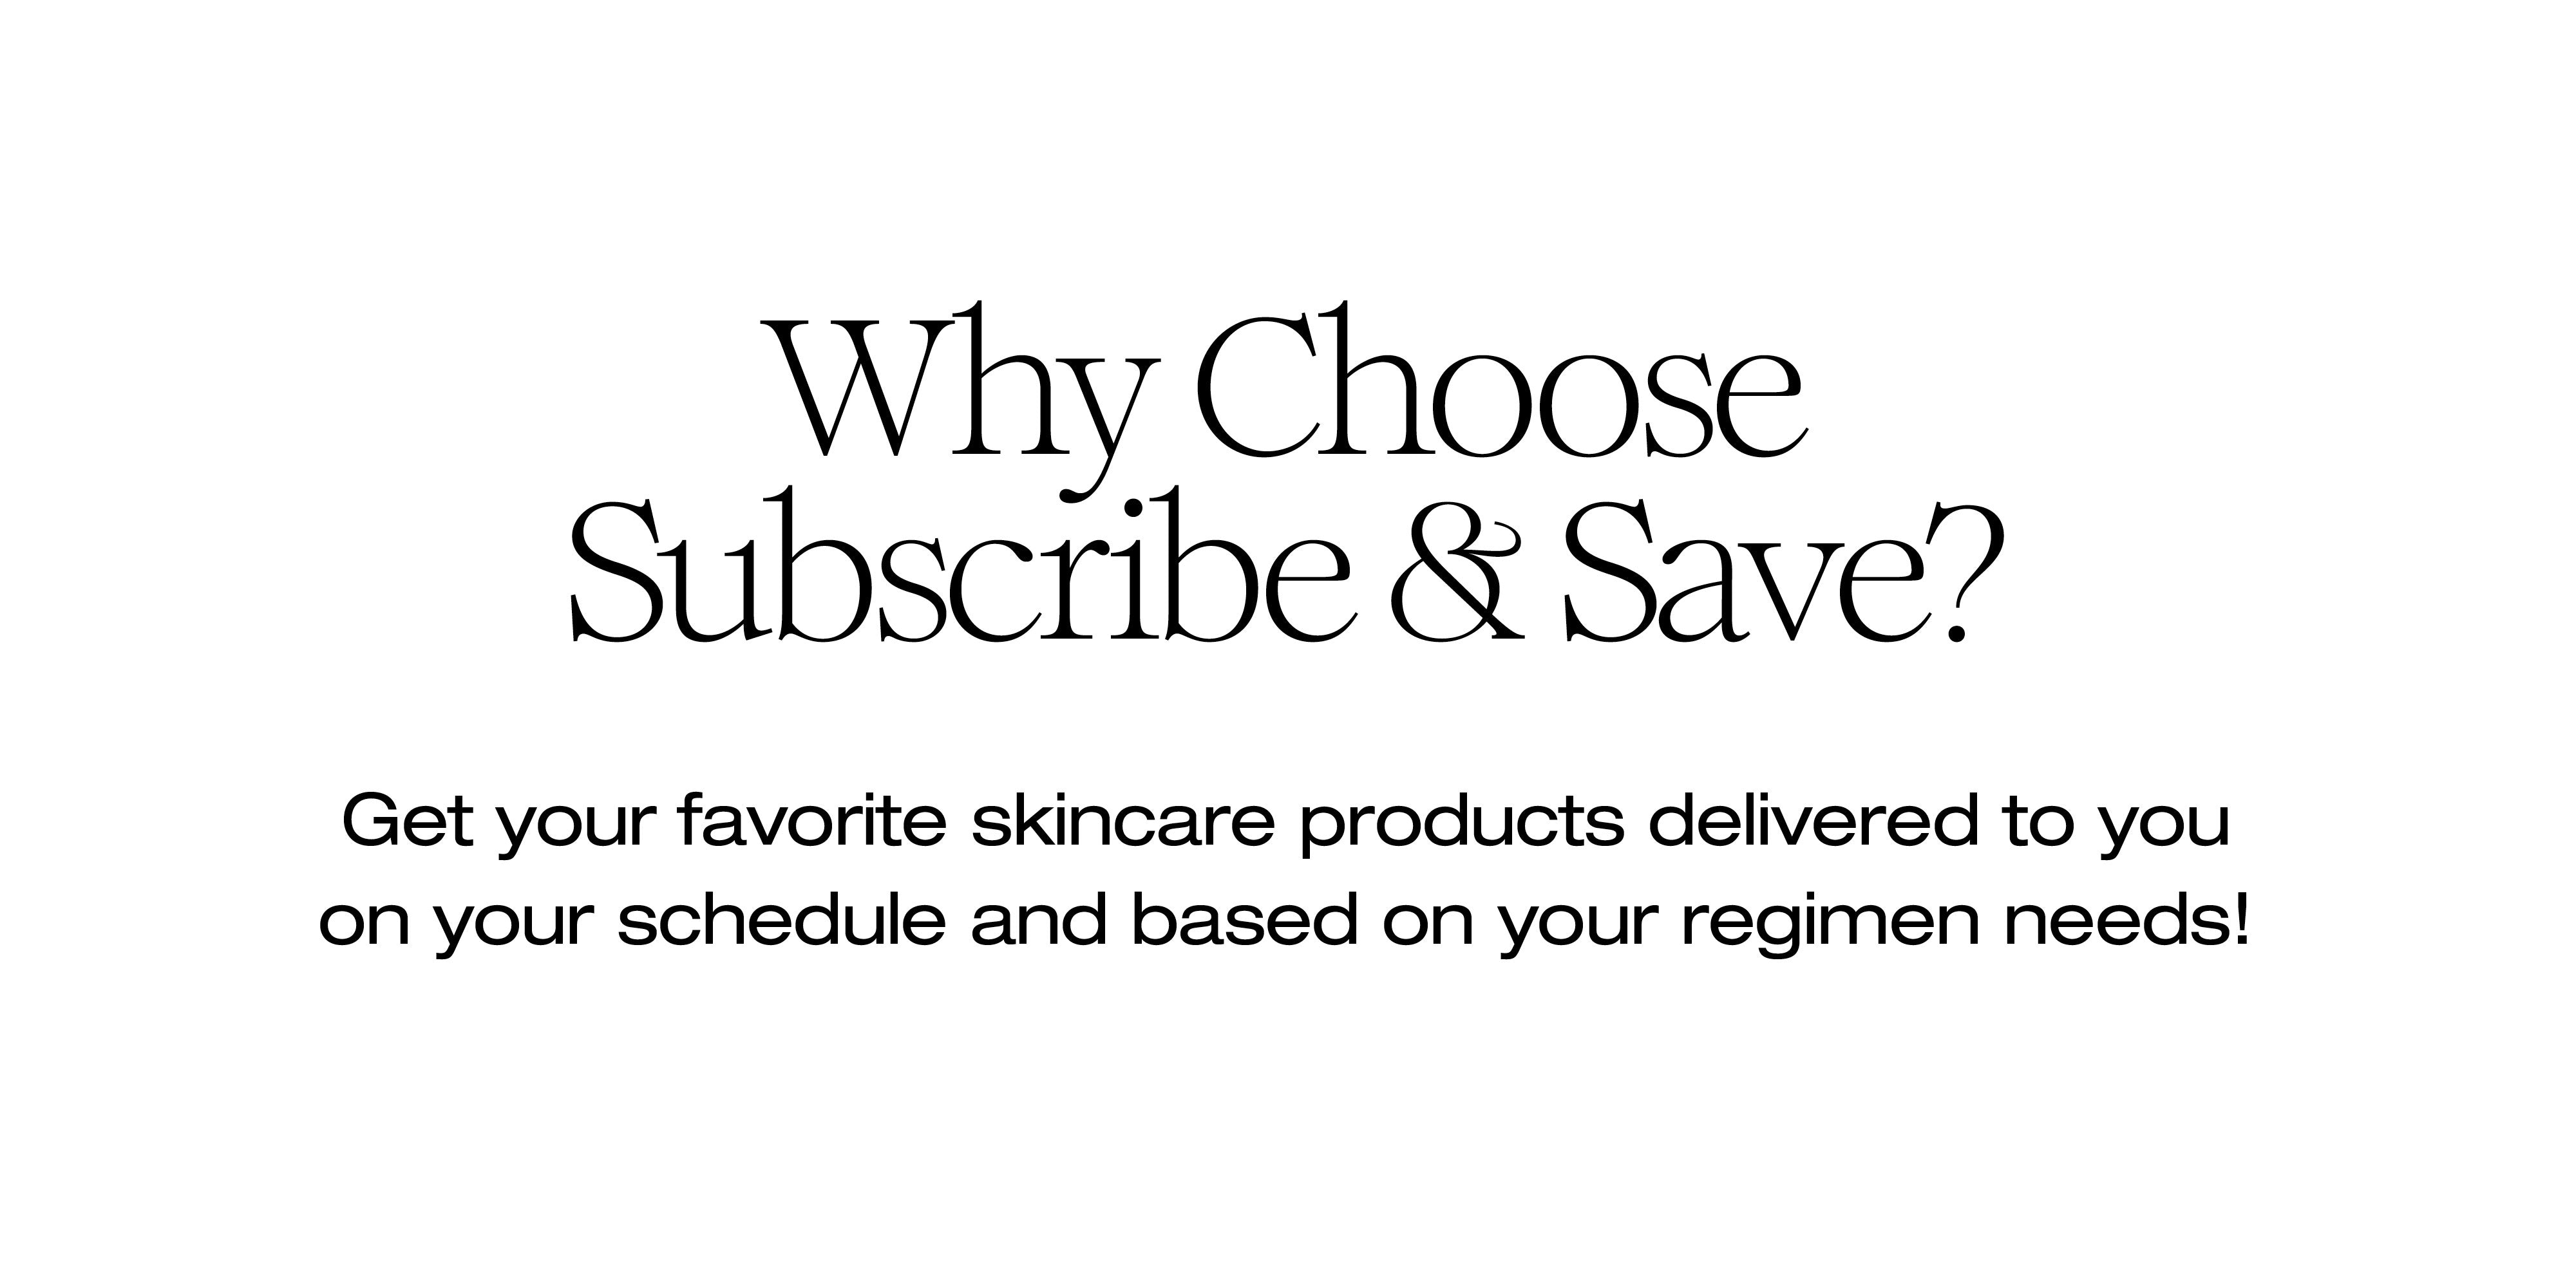 Get your favorite skincare products delivered to you on your schedule and based on your regimen needs!